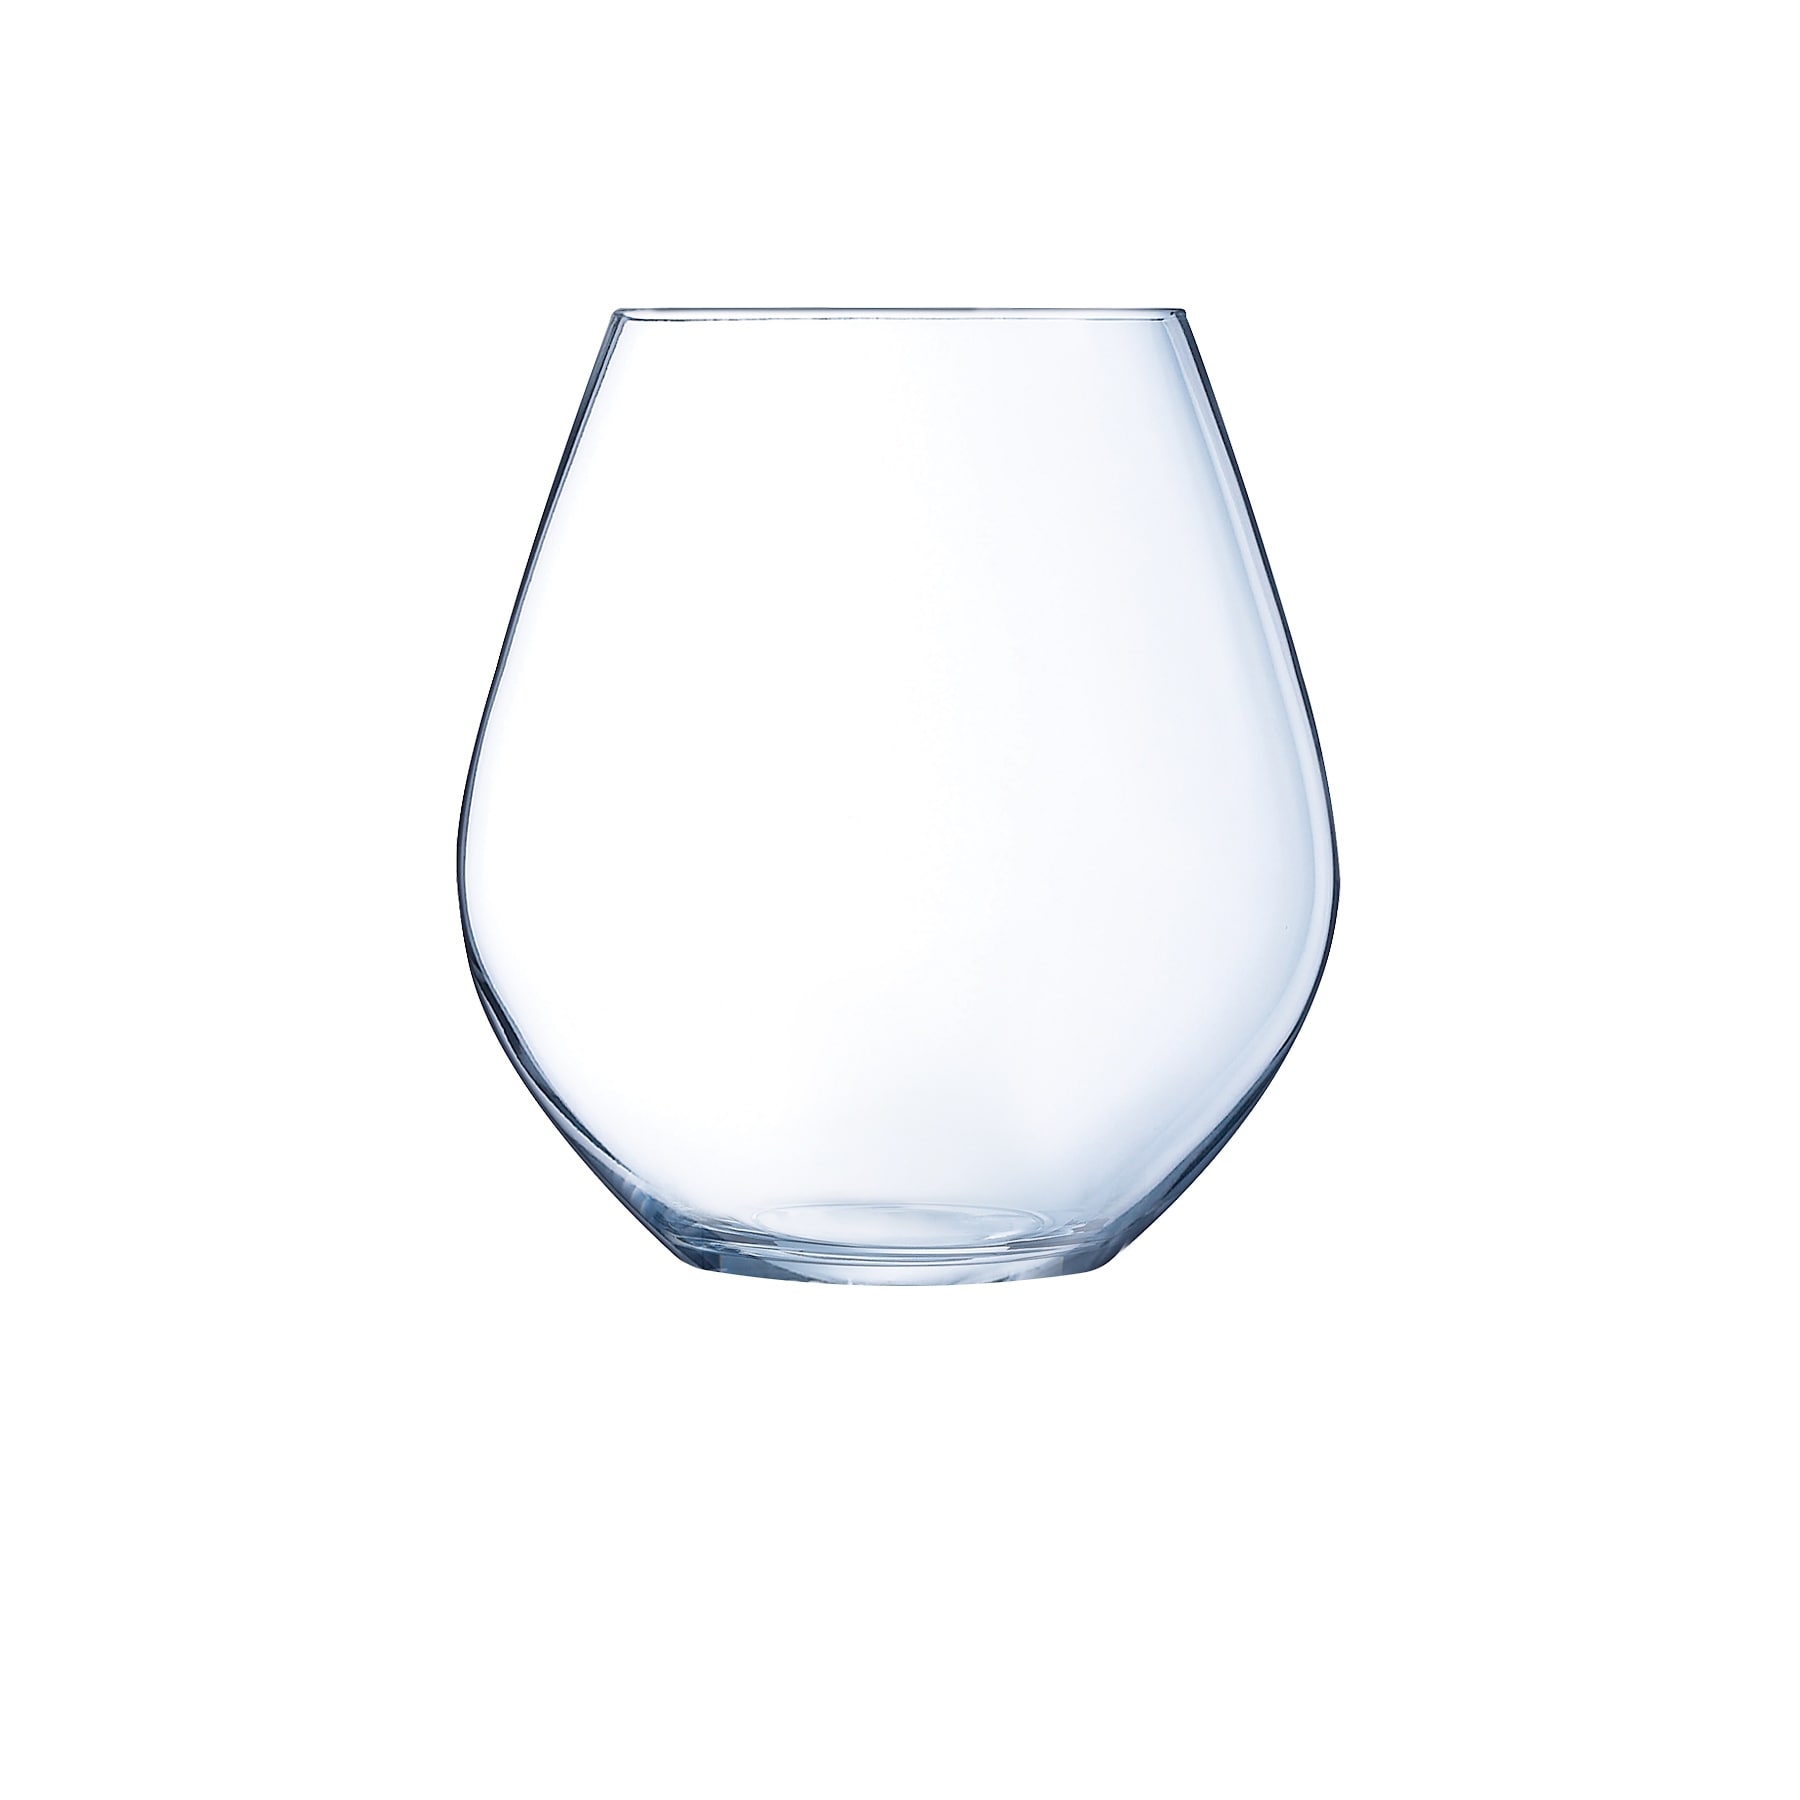 TABLE 12 15.5-Ounce Stemless Wine Glasses, Set of 6, Lead-Free